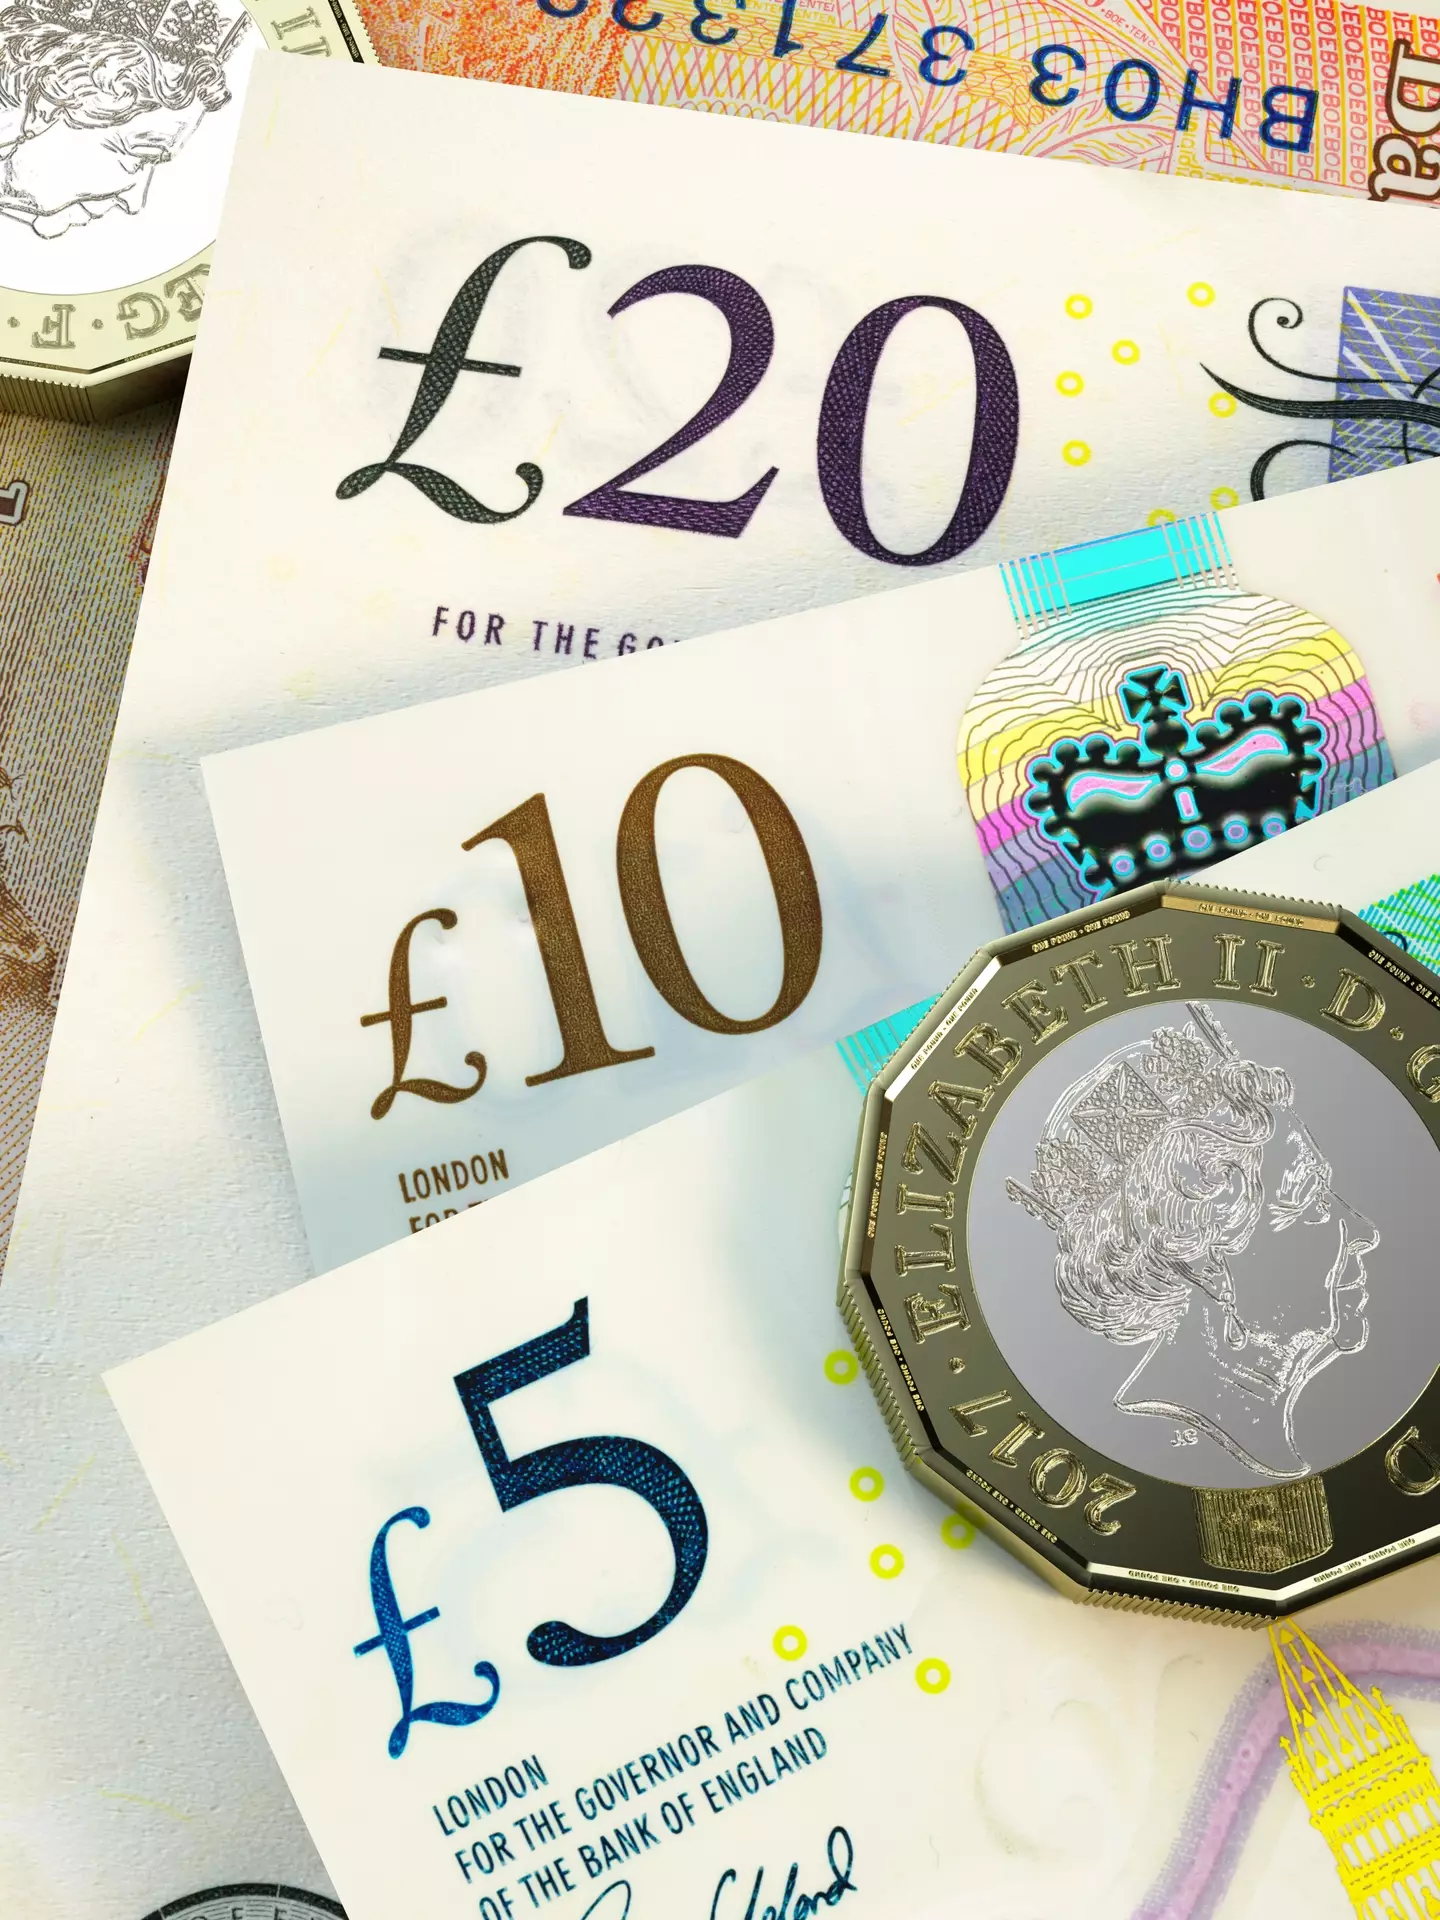 Thousands of British households have only weeks left to claim a £150 council tax rebate.